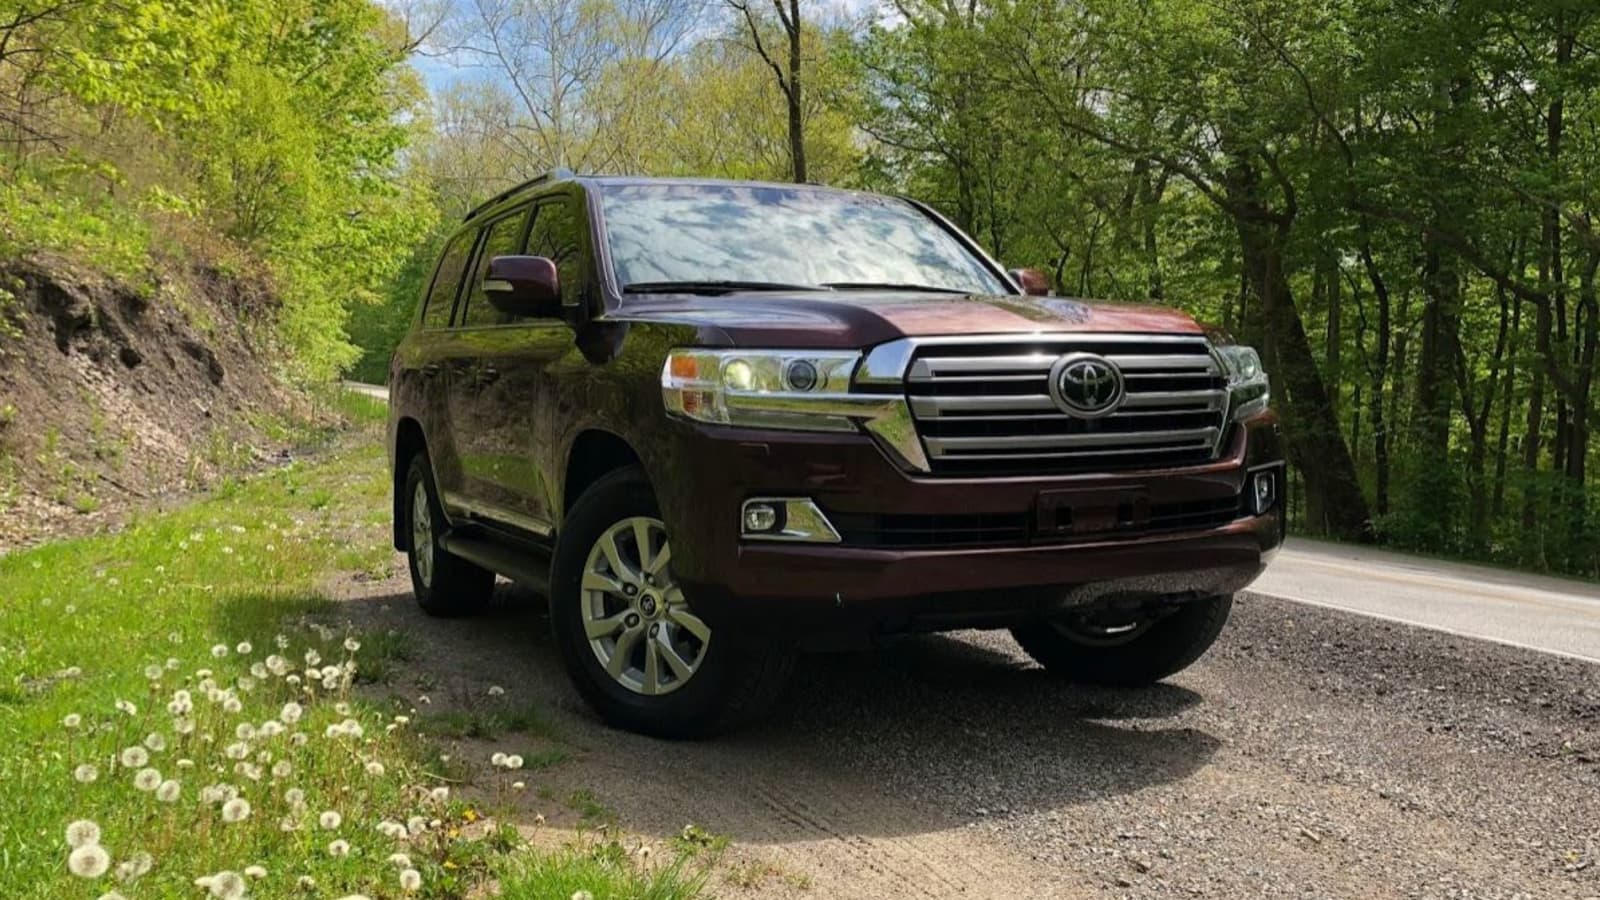 2018 Toyota Land Cruiser Review